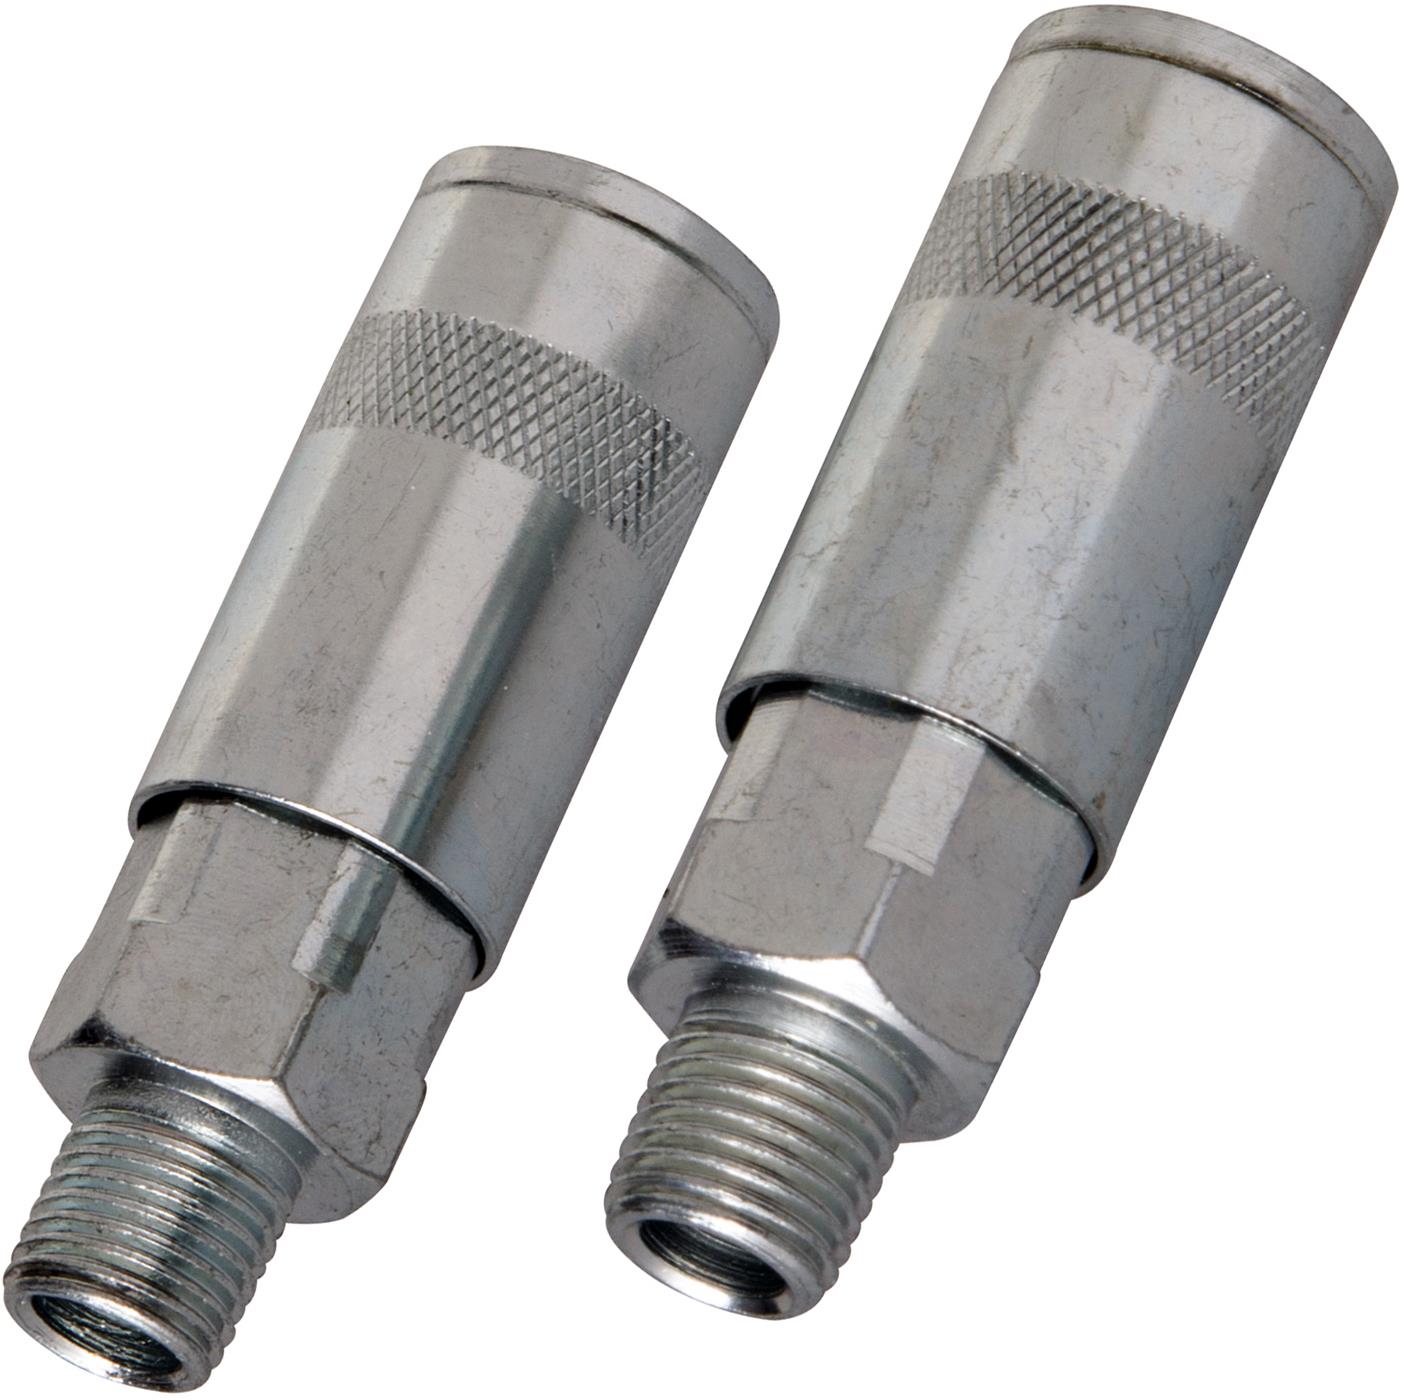 Silverline 2 Piece Quick Couplers 1/4" BSP Male Thread 6mm Air Tool Connector